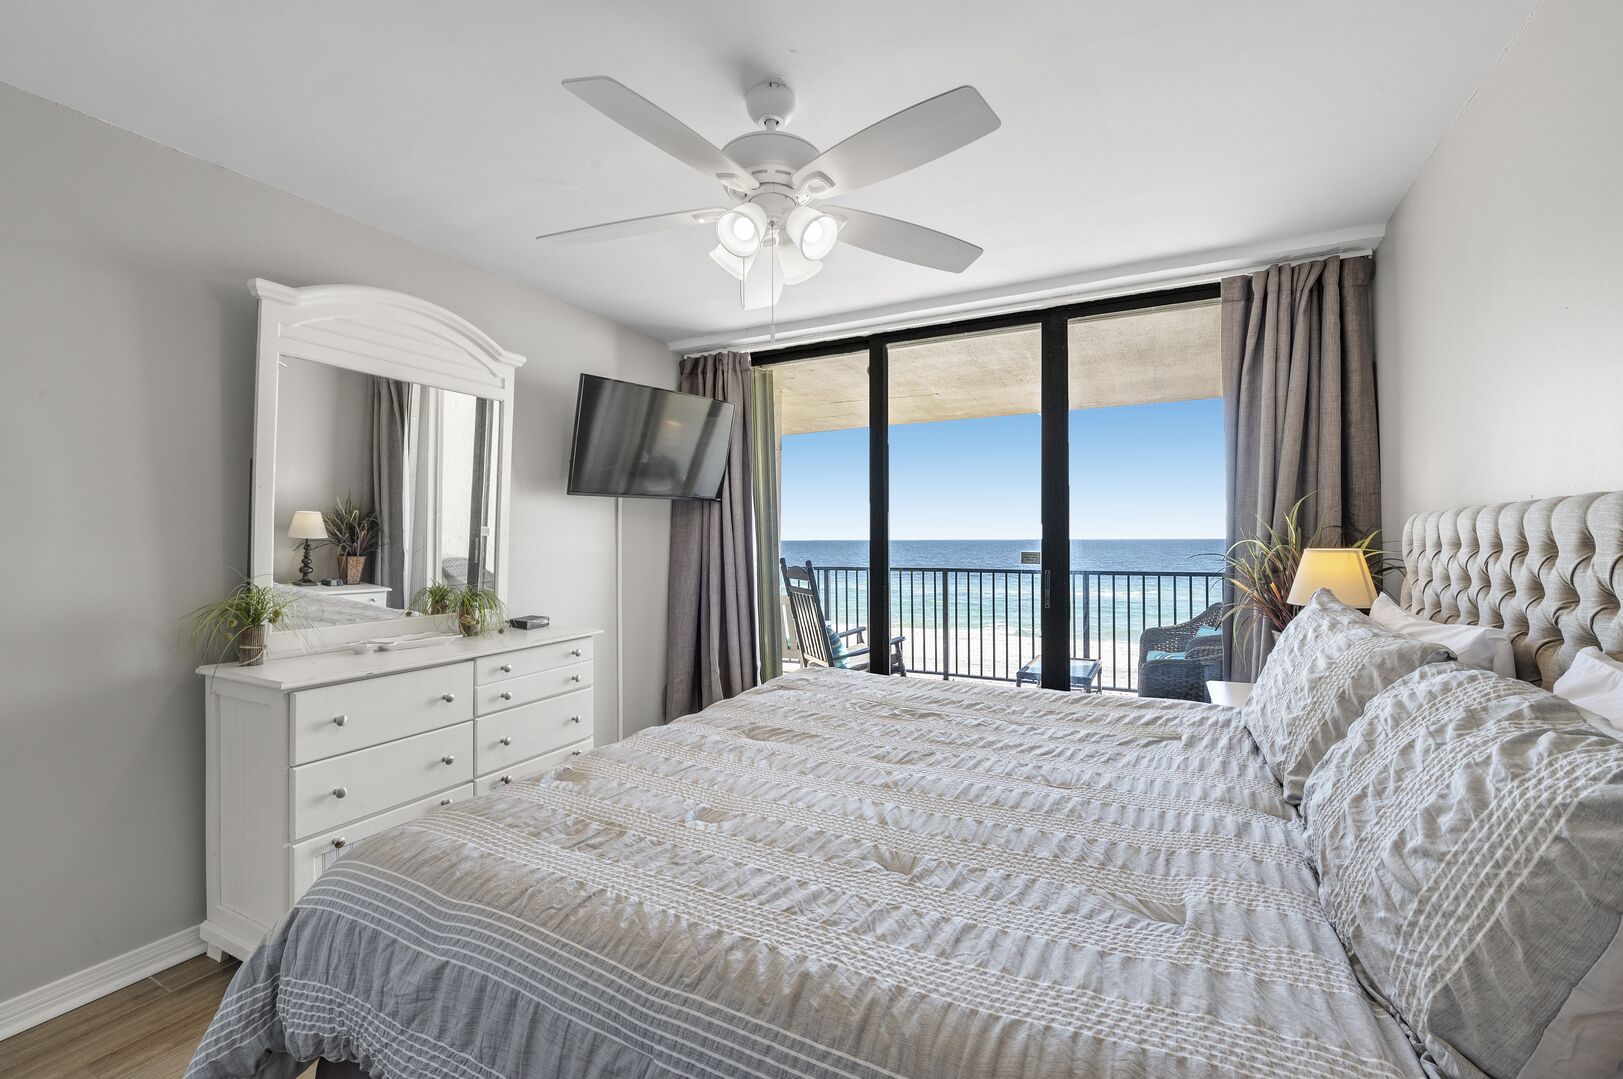 The master bedroom has a king size bed with private balcony access.